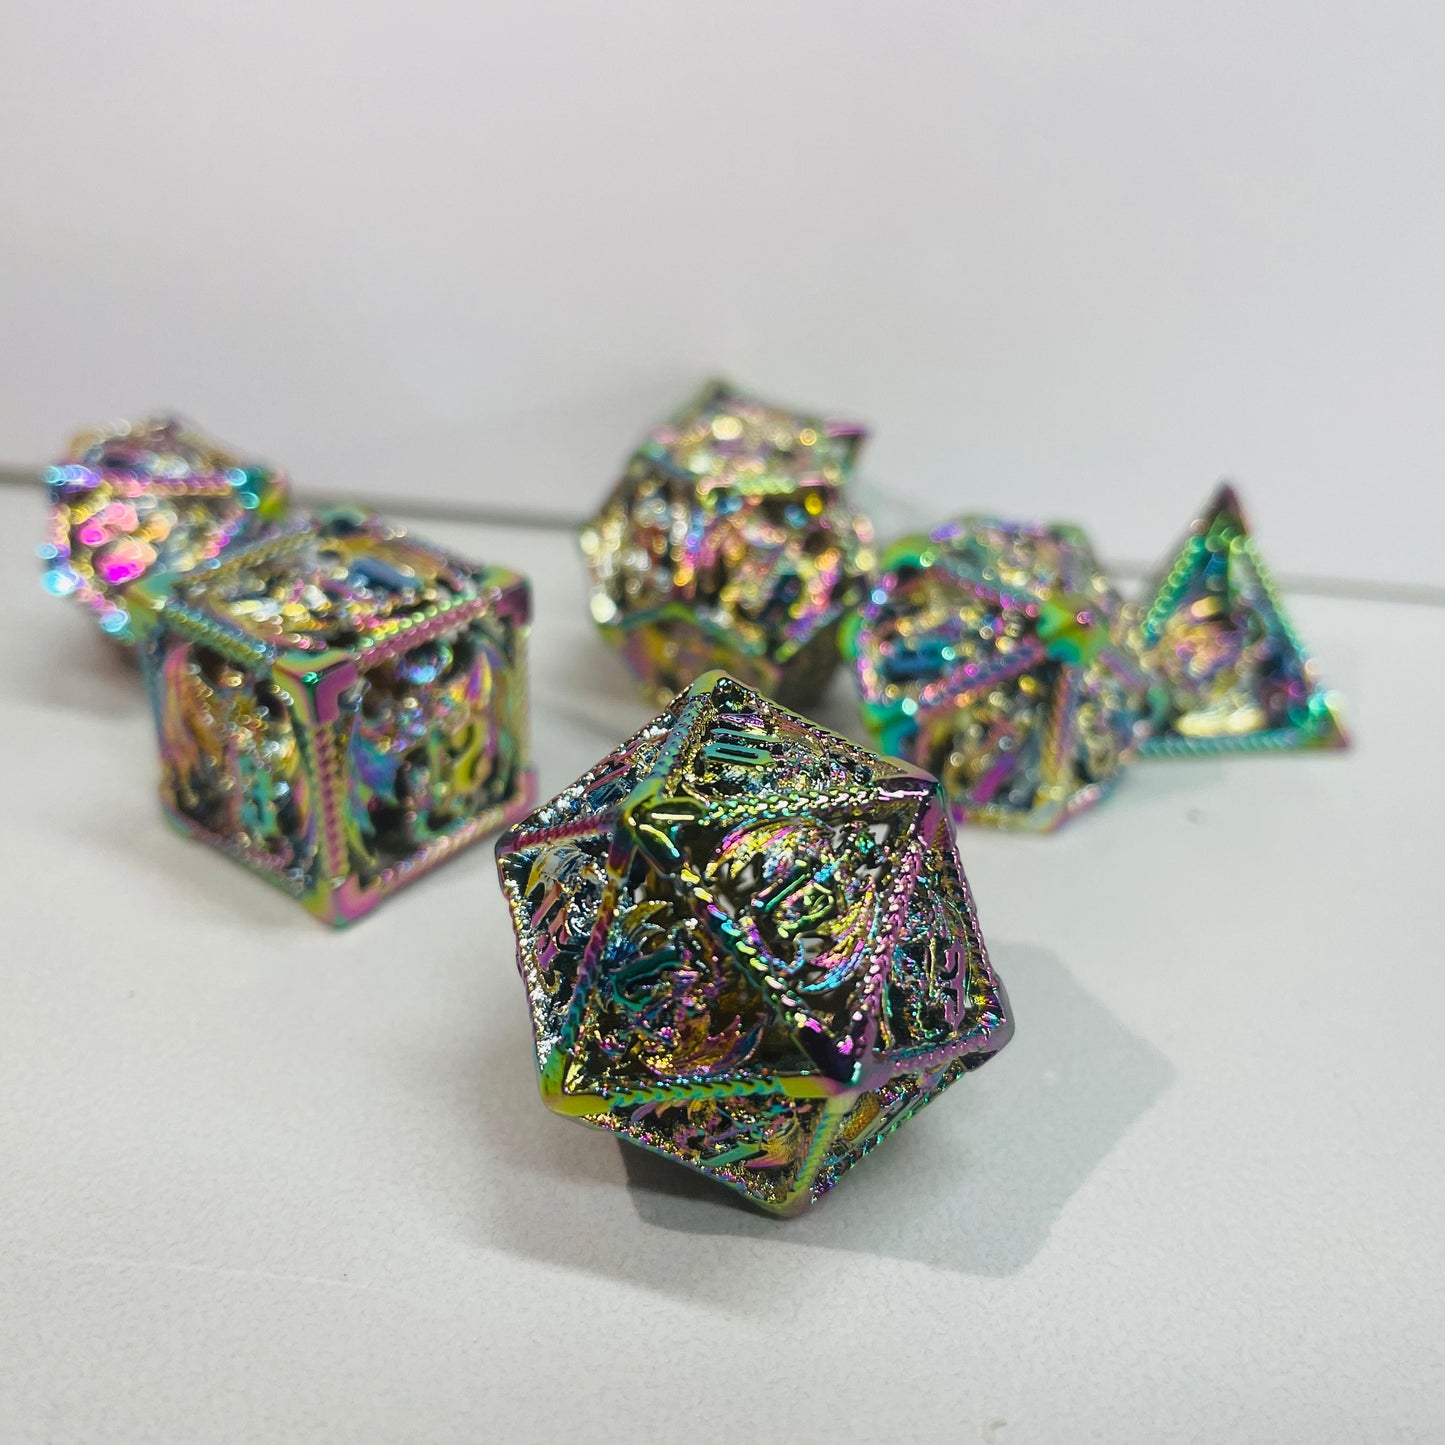 FREE Today: Dragon Sword Hollow Colorful Metal Dice (Give away an additional random dice set)